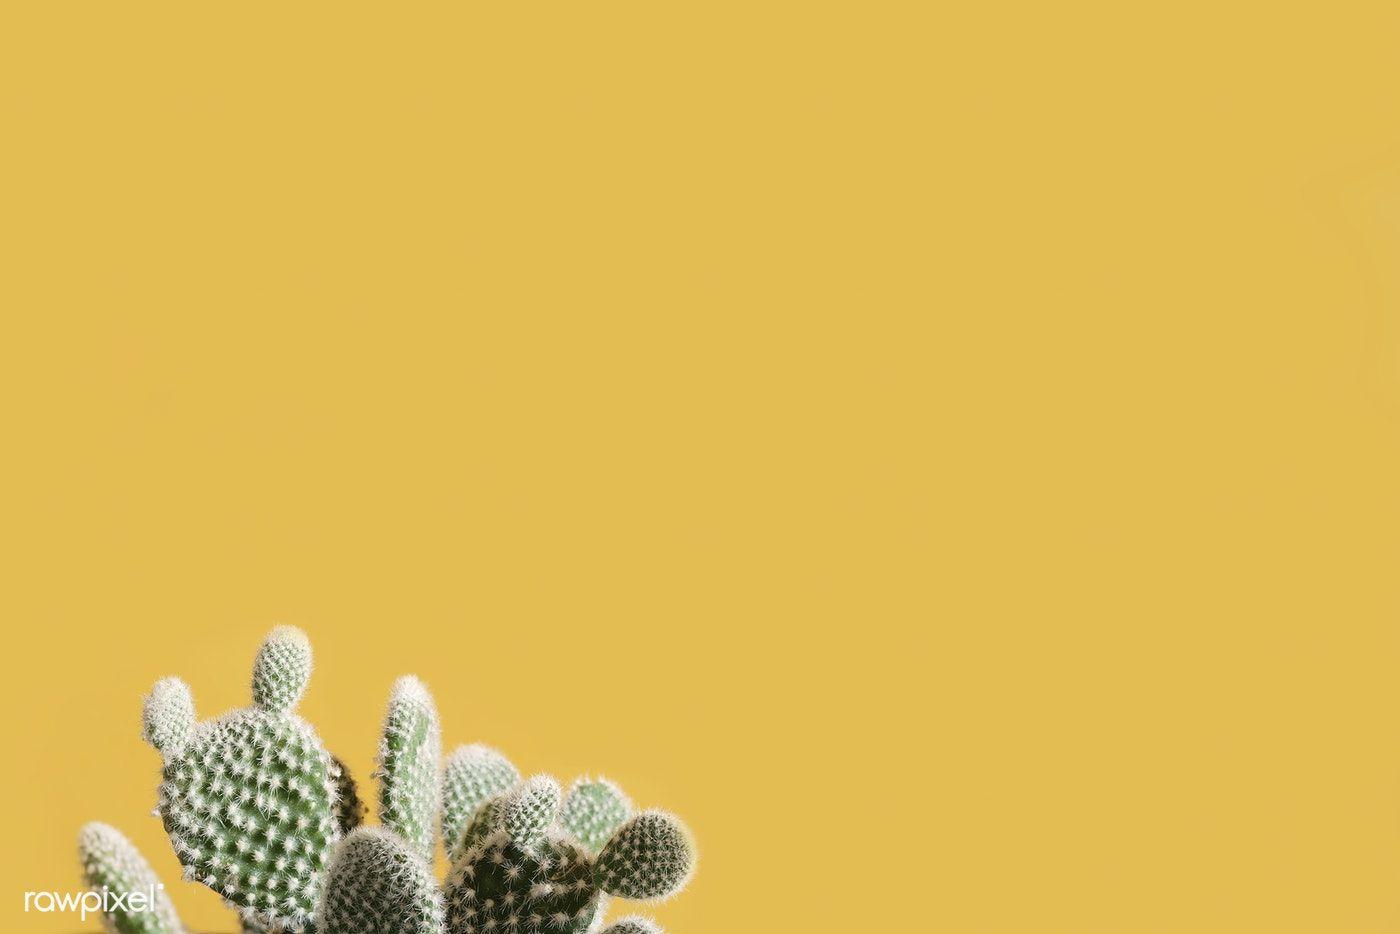 Cactus on a yellow background. free image